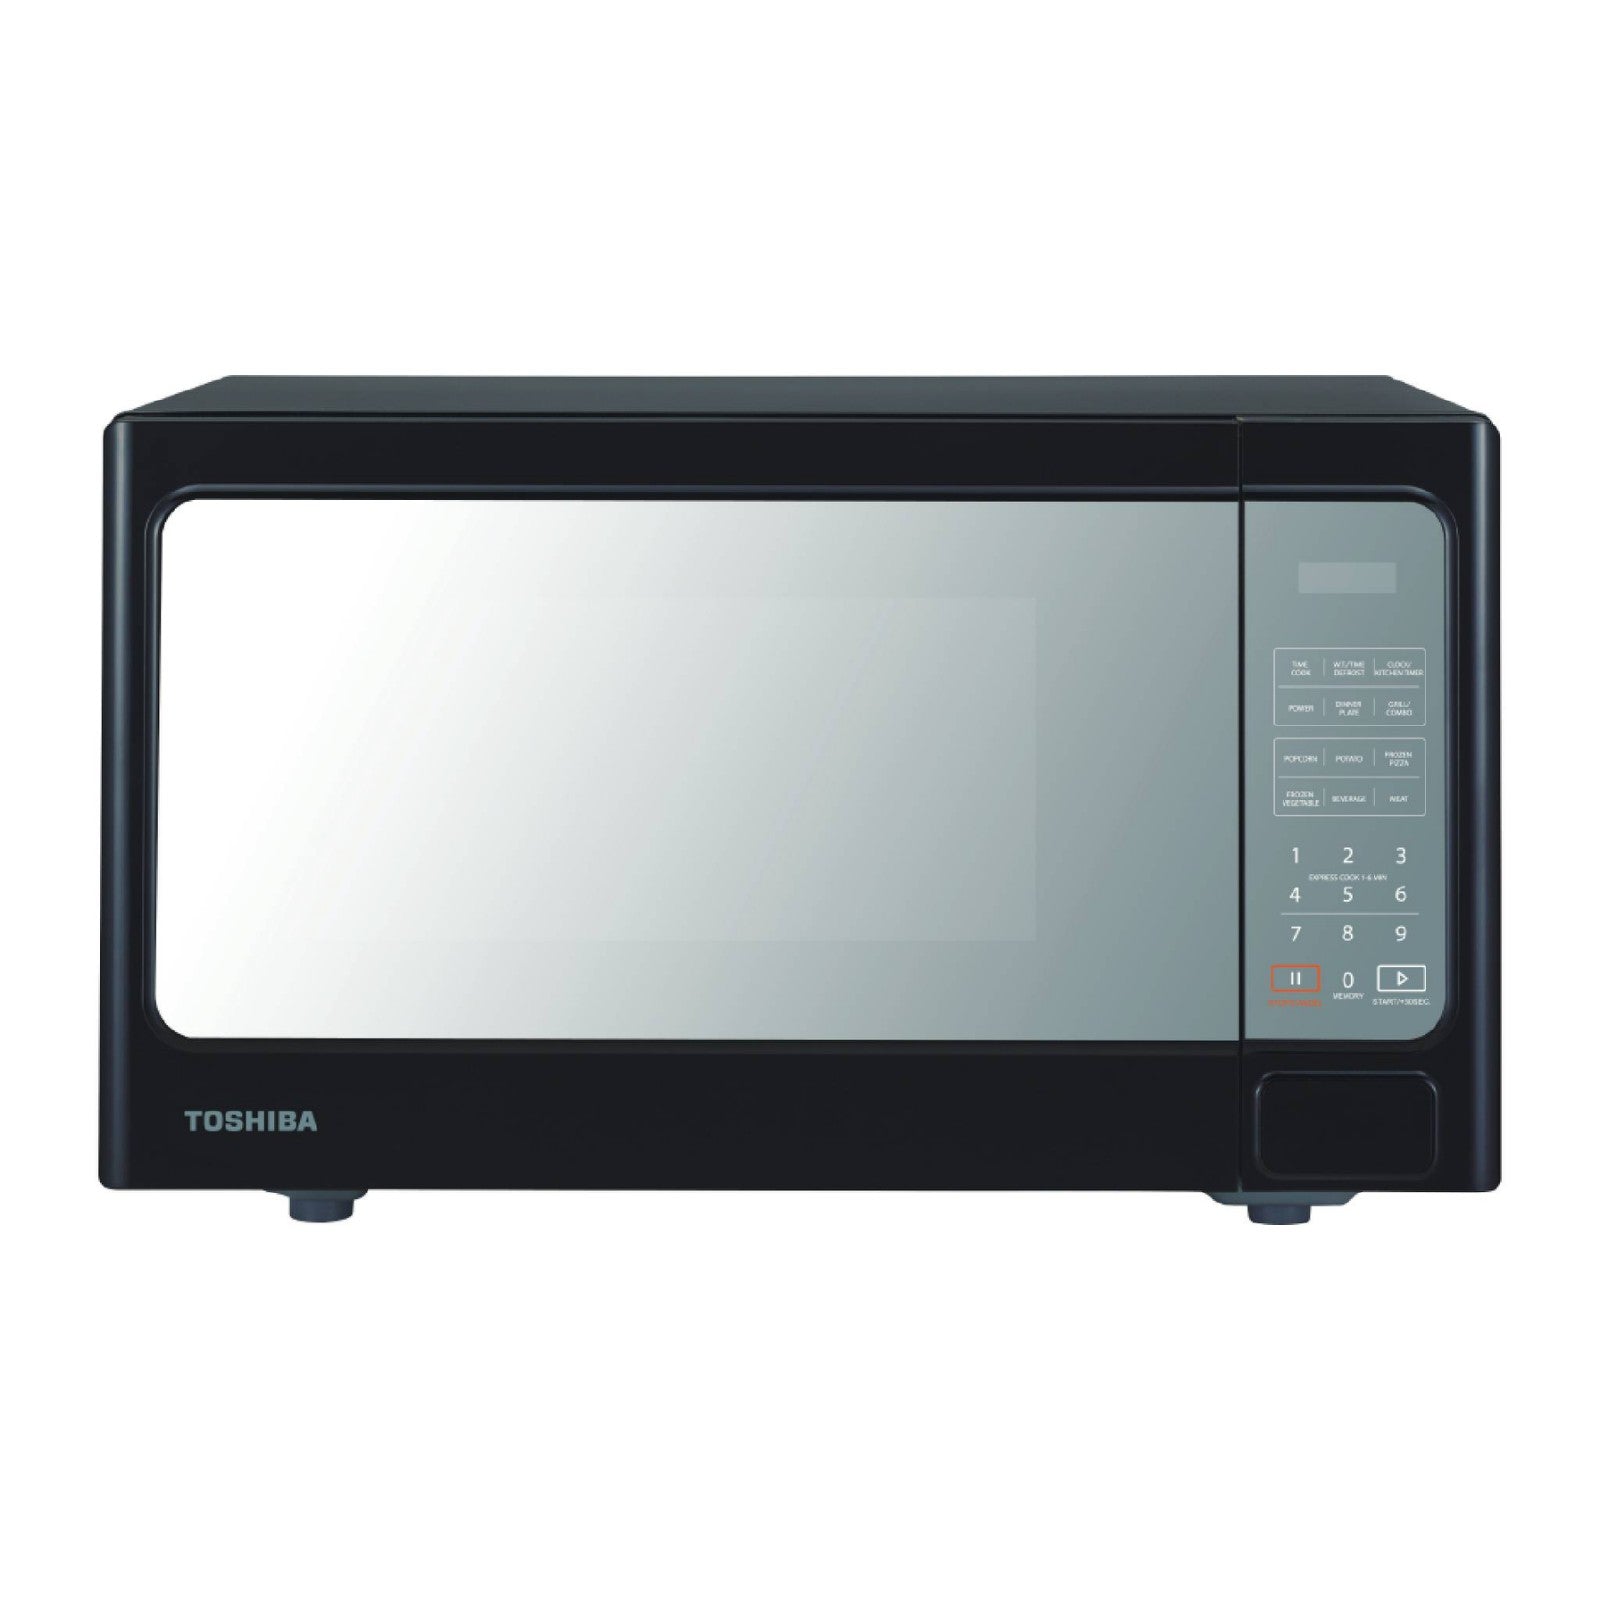 Great Value Toshiba 25L Digital Control with Grill Function Microwave Oven